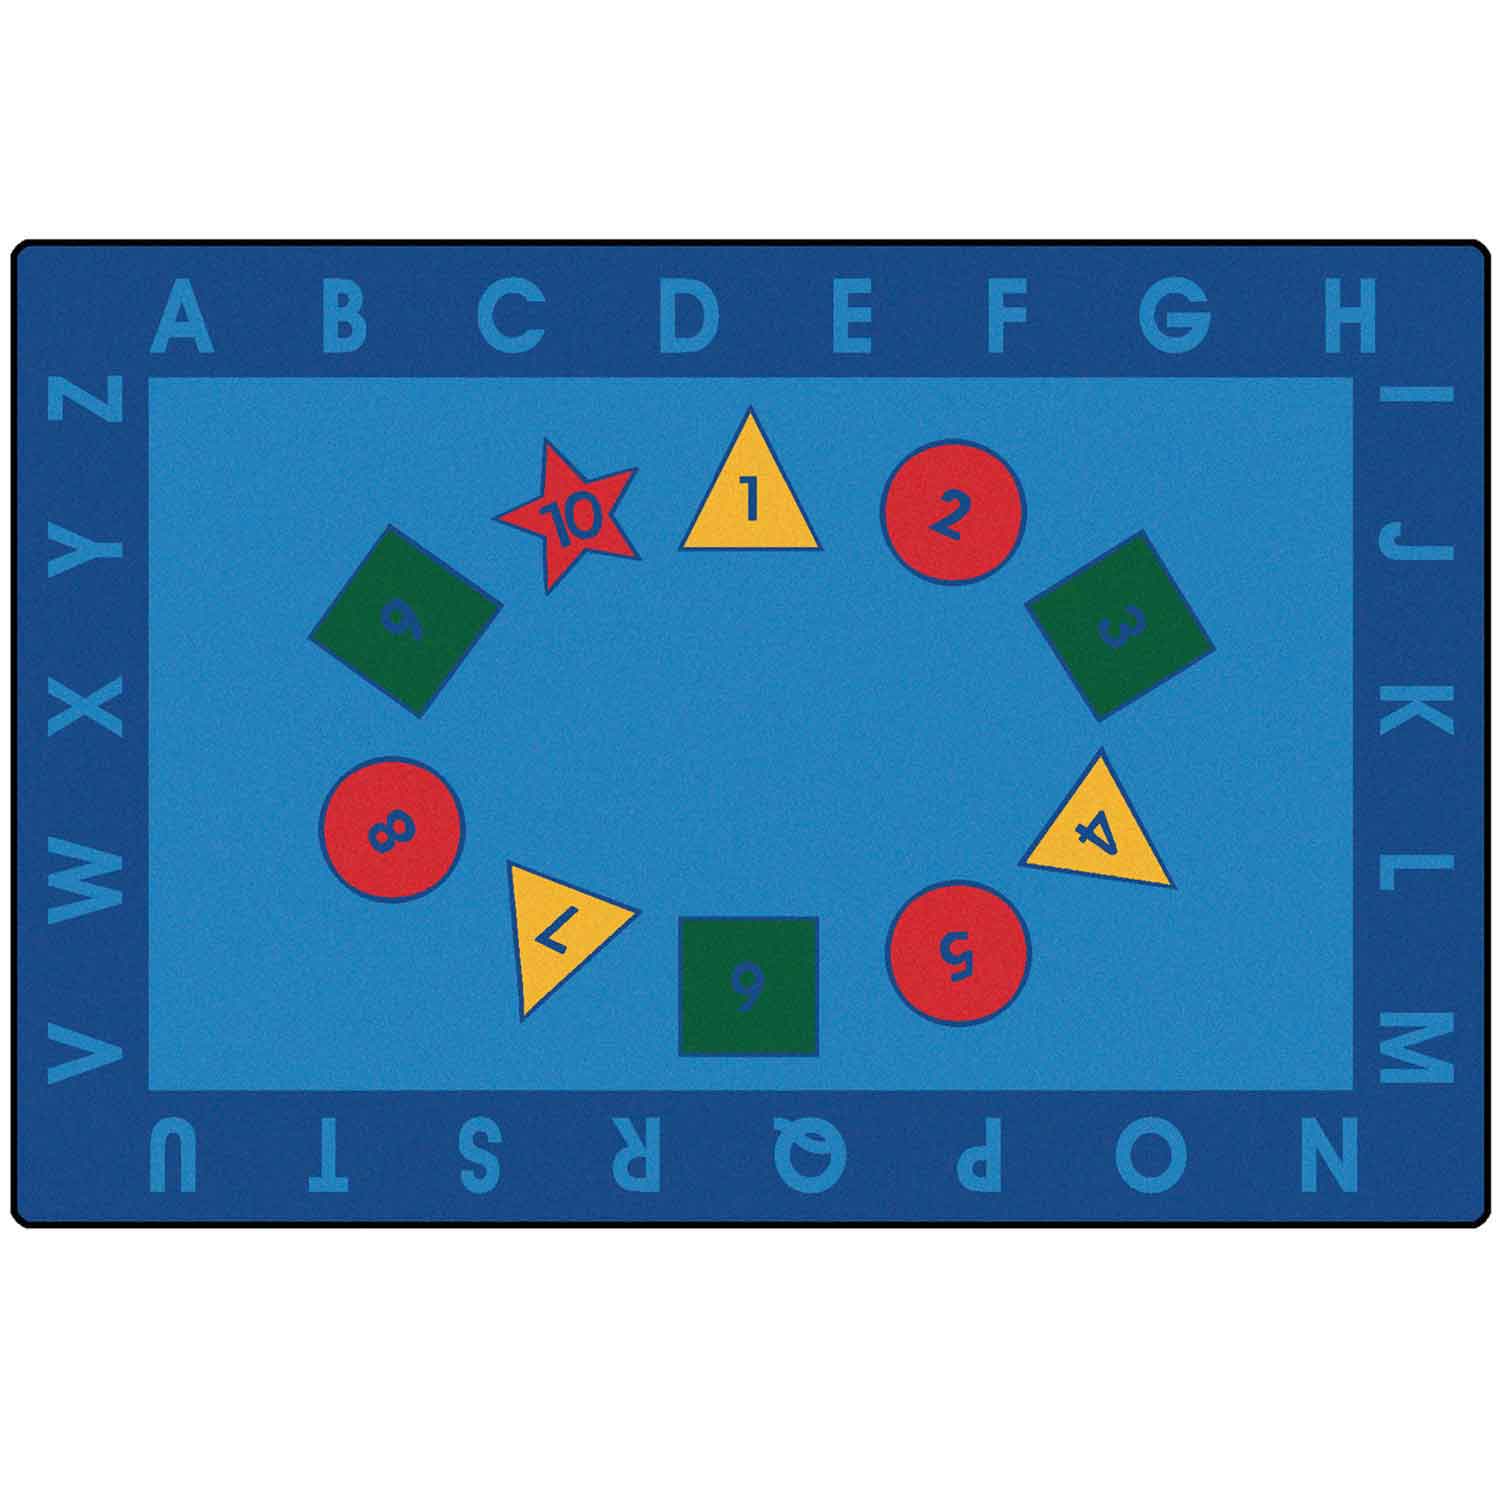 KID$ Value Plus Classroom Rugs™, Early Learning